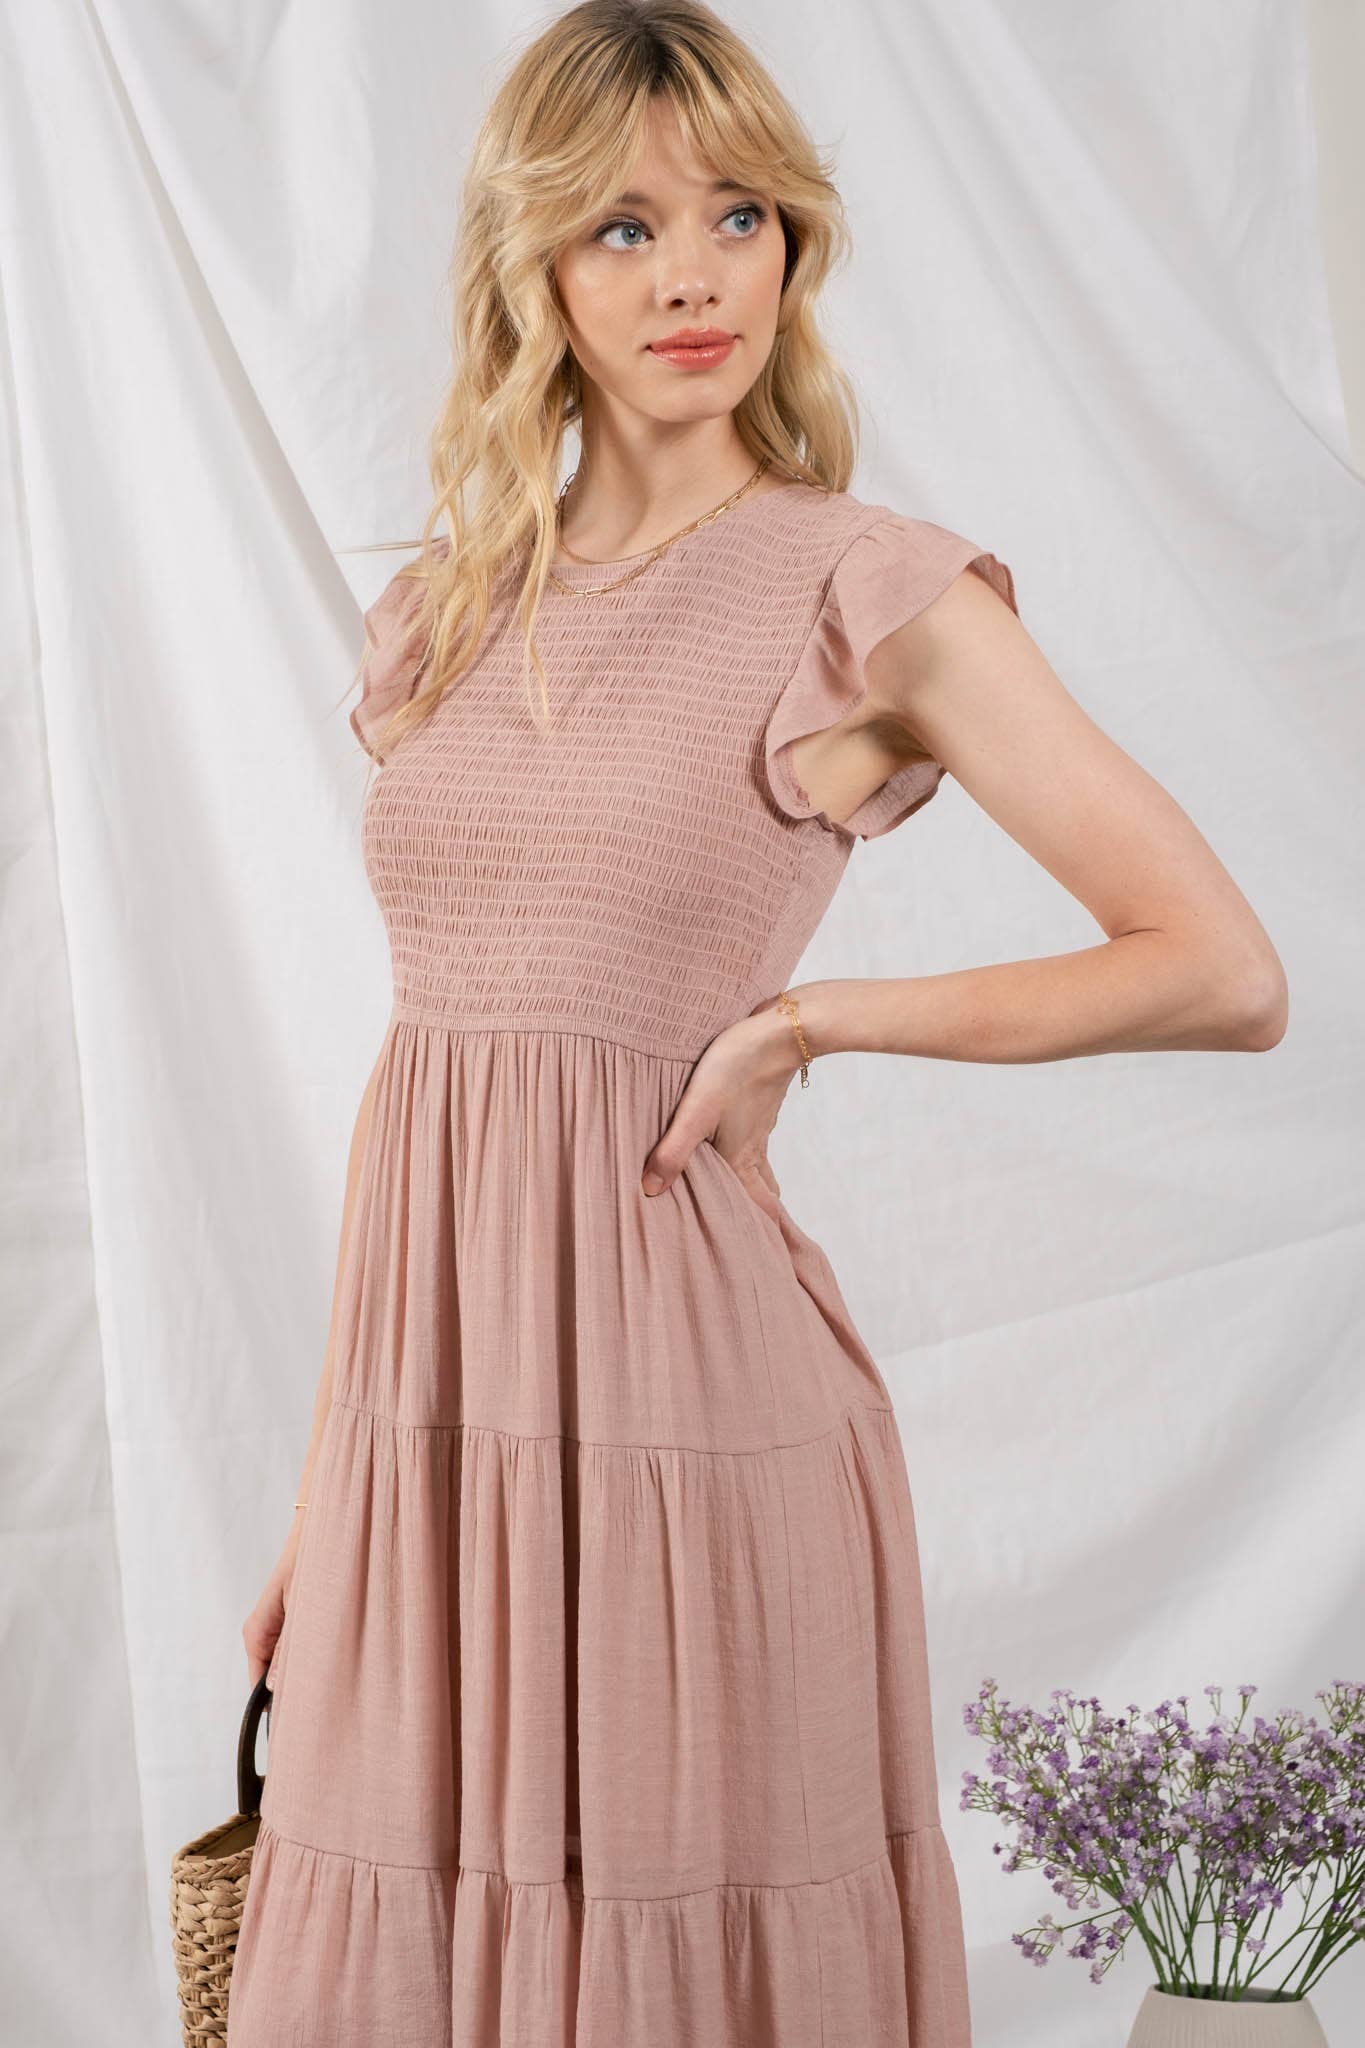 By The River - SMOCKED TIERED MIDI DRESS